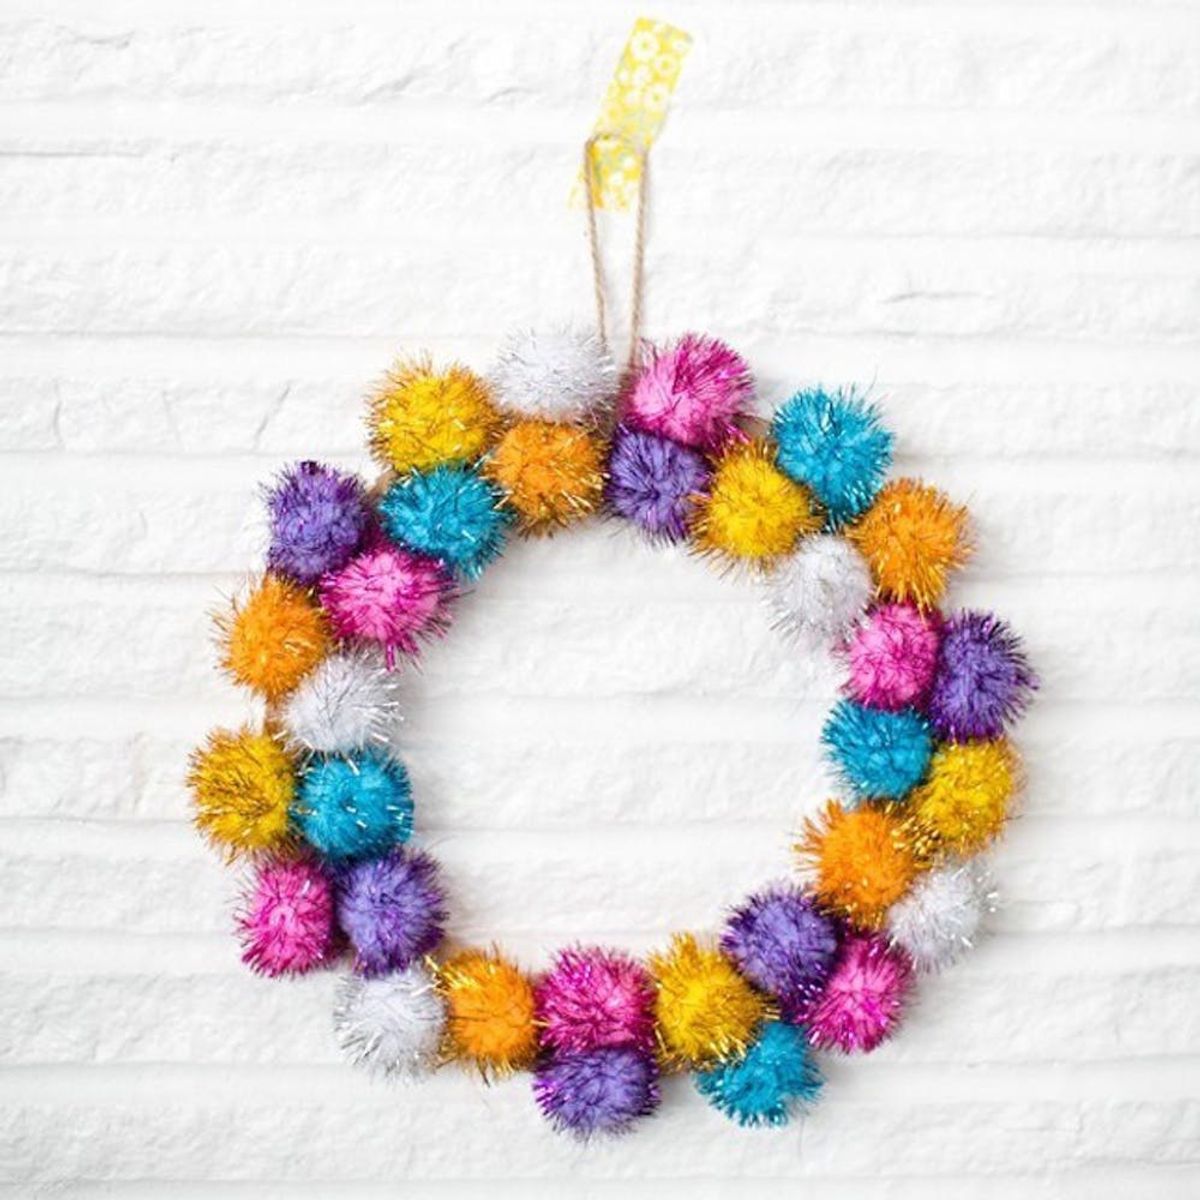 17 Leafless Holiday Wreaths You Can Totally DIY